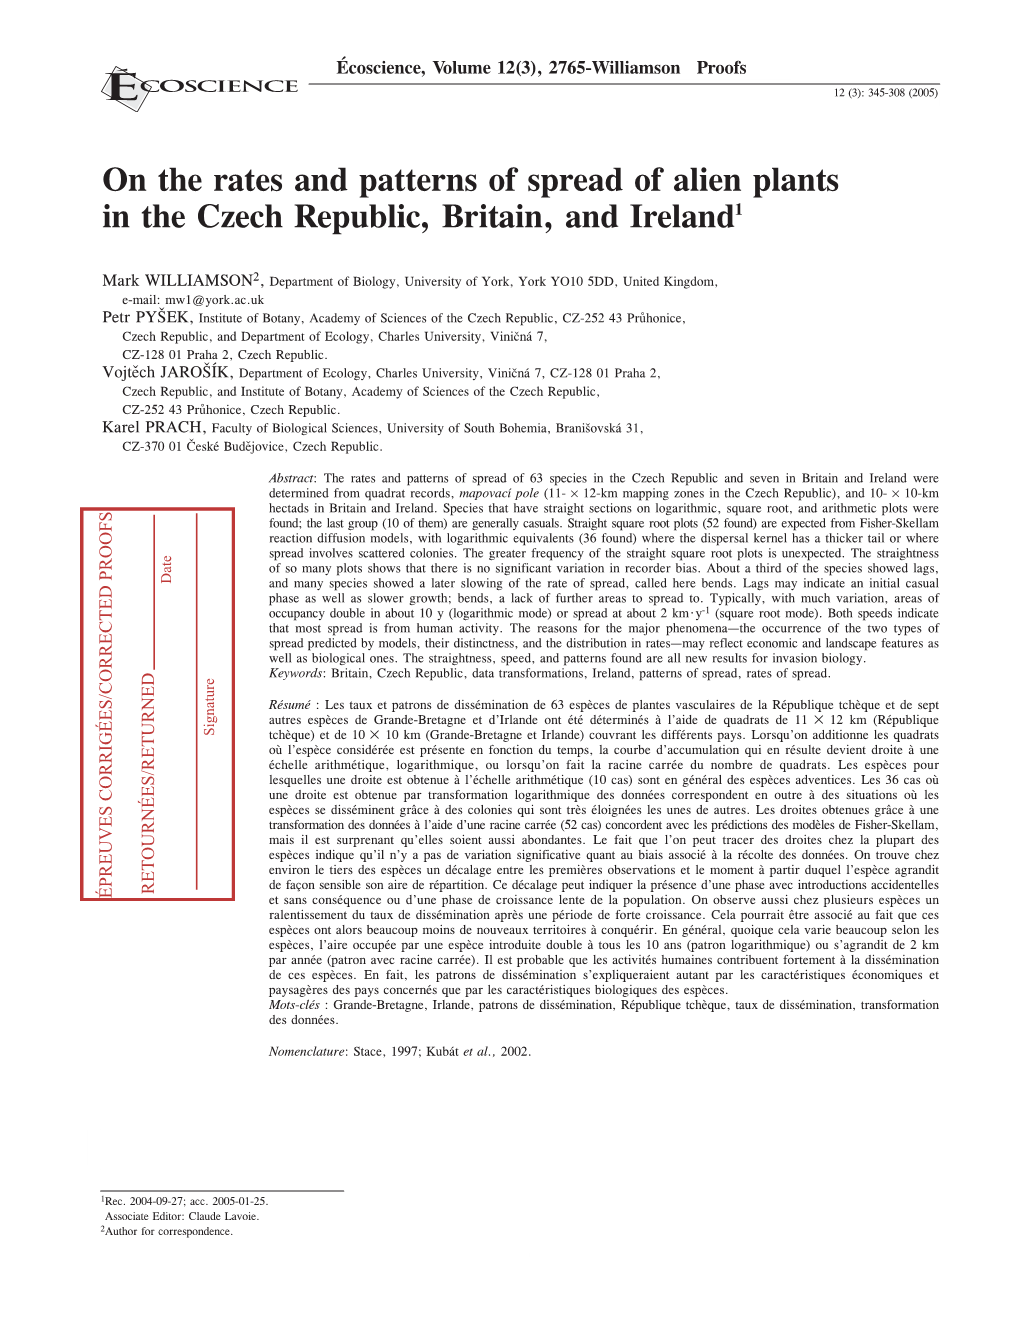 On the Rates and Patterns of Spread of Alien Plants in the Czech Republic, Britain, and Ireland1